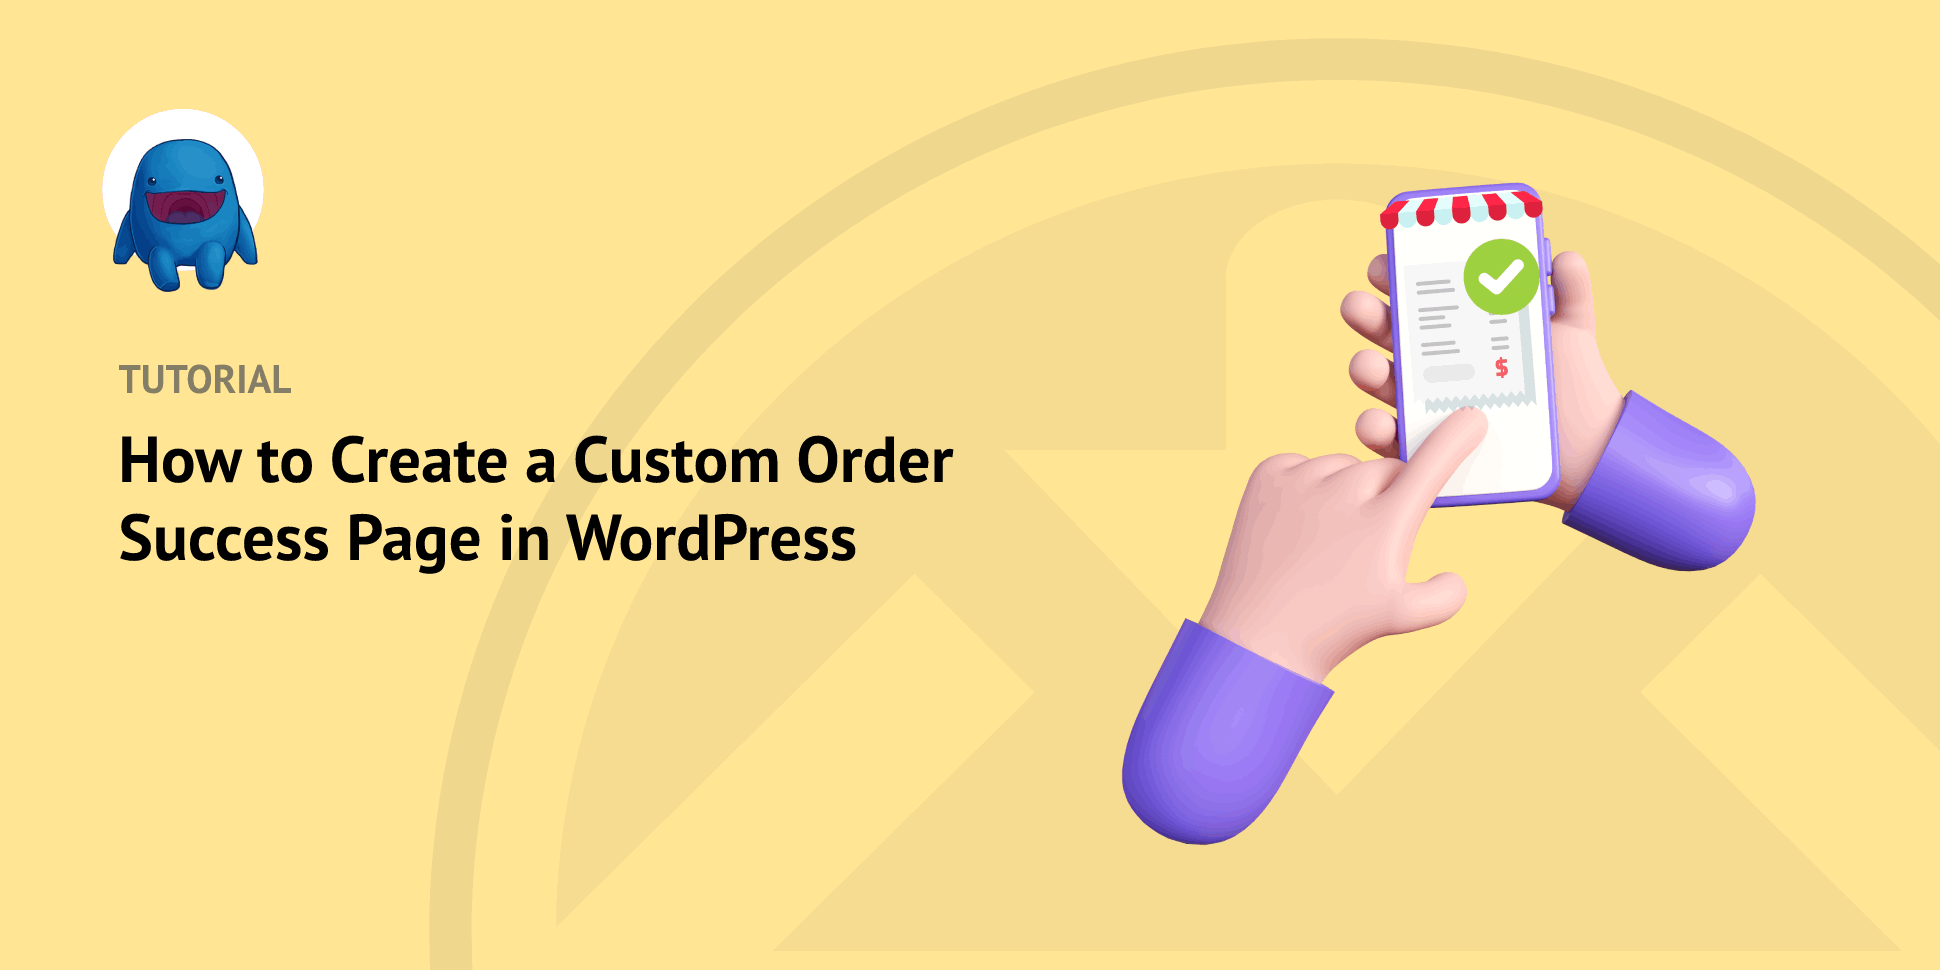 How To Create a Custom Order Success Page in WordPress